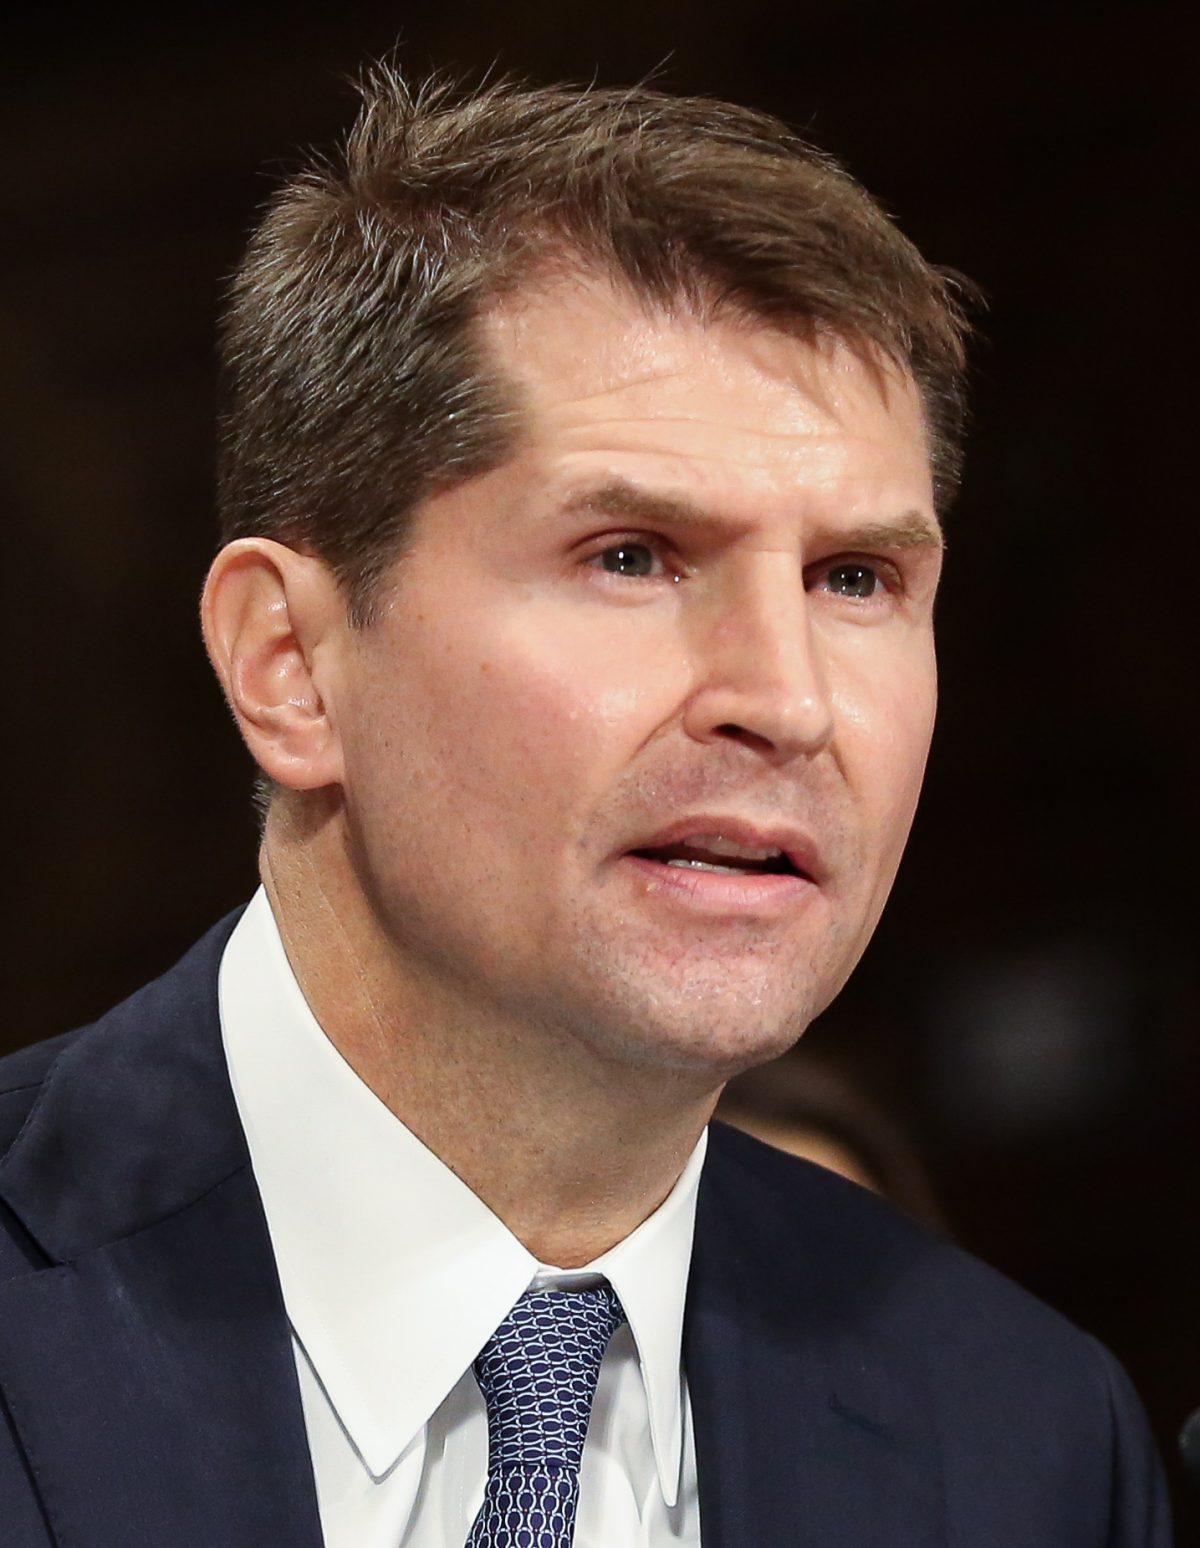 Assistant Director of the FBI's Counterintelligence Division Bill Priestap. (Jennifer Zeng/The Epoch Times)